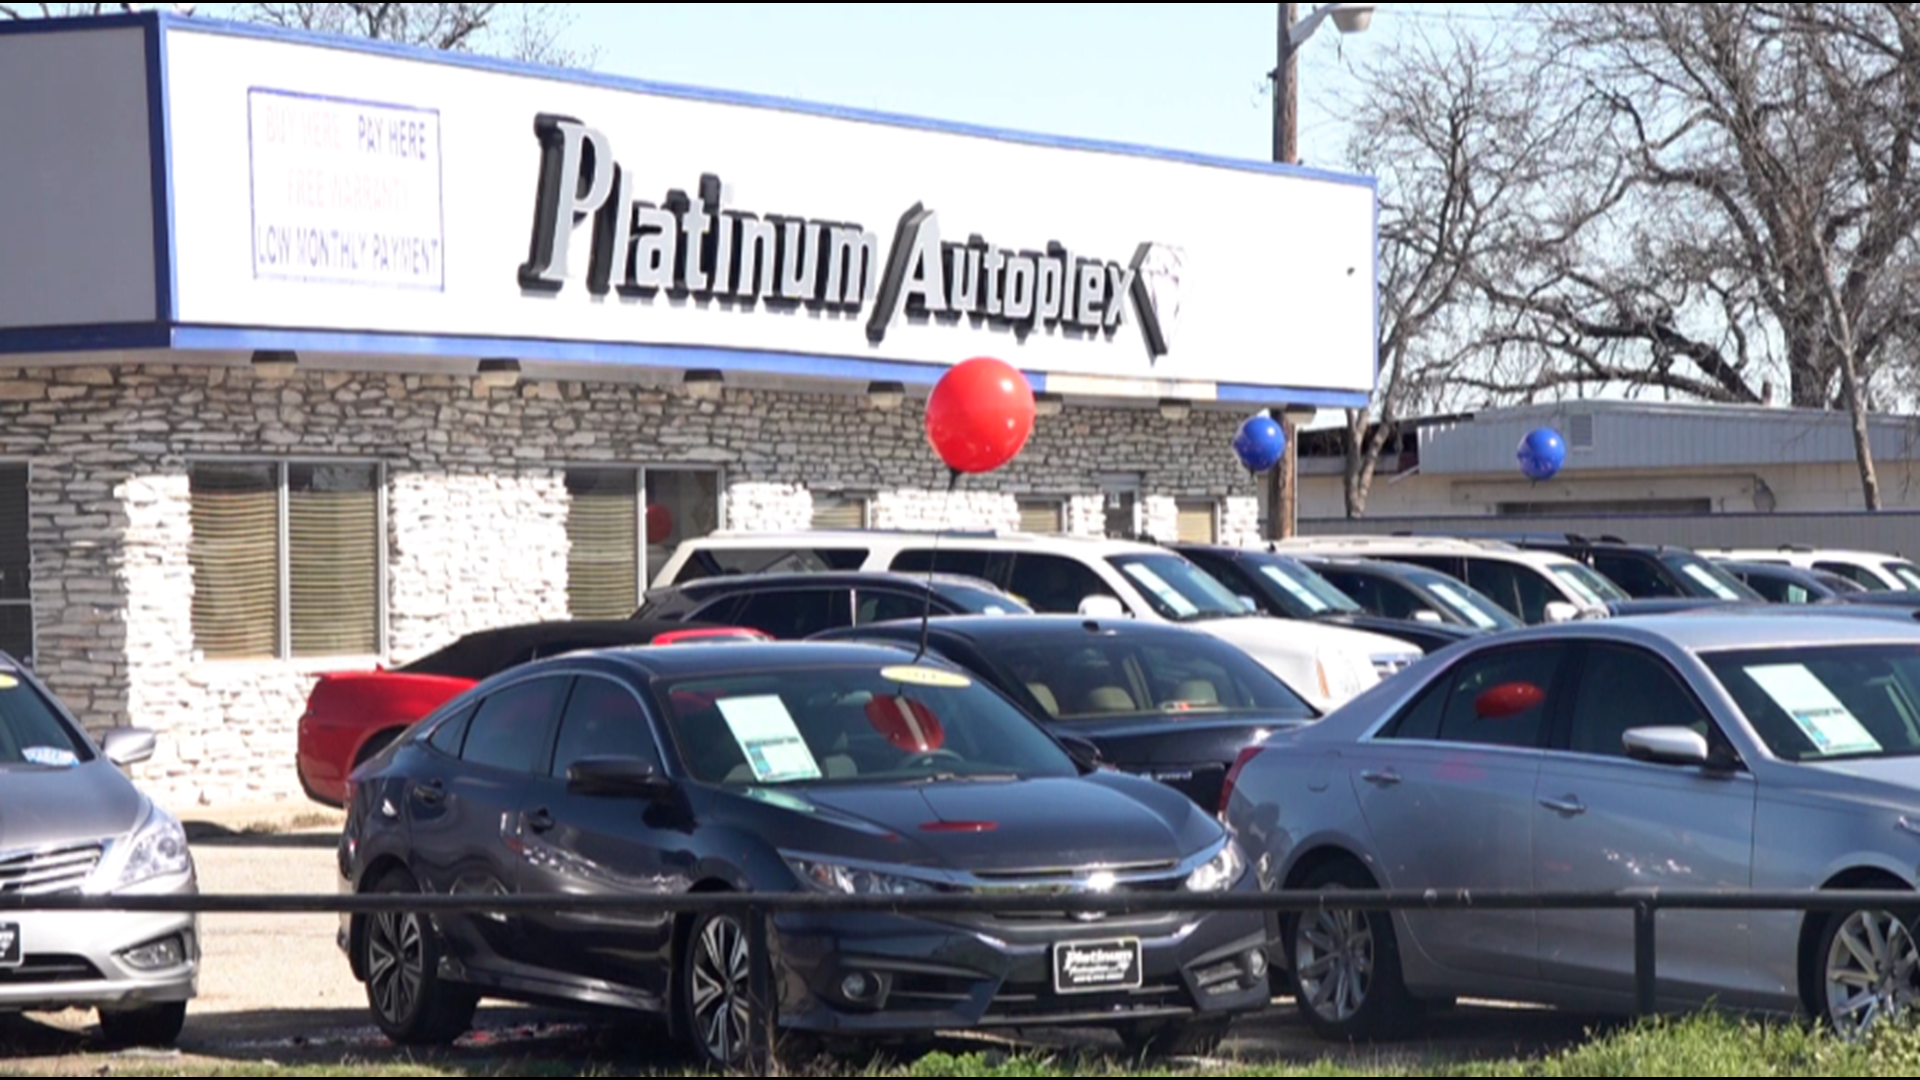 A Round Rock woman bought a used car in Killeen, but said she has waited months for the business to keep their promise.